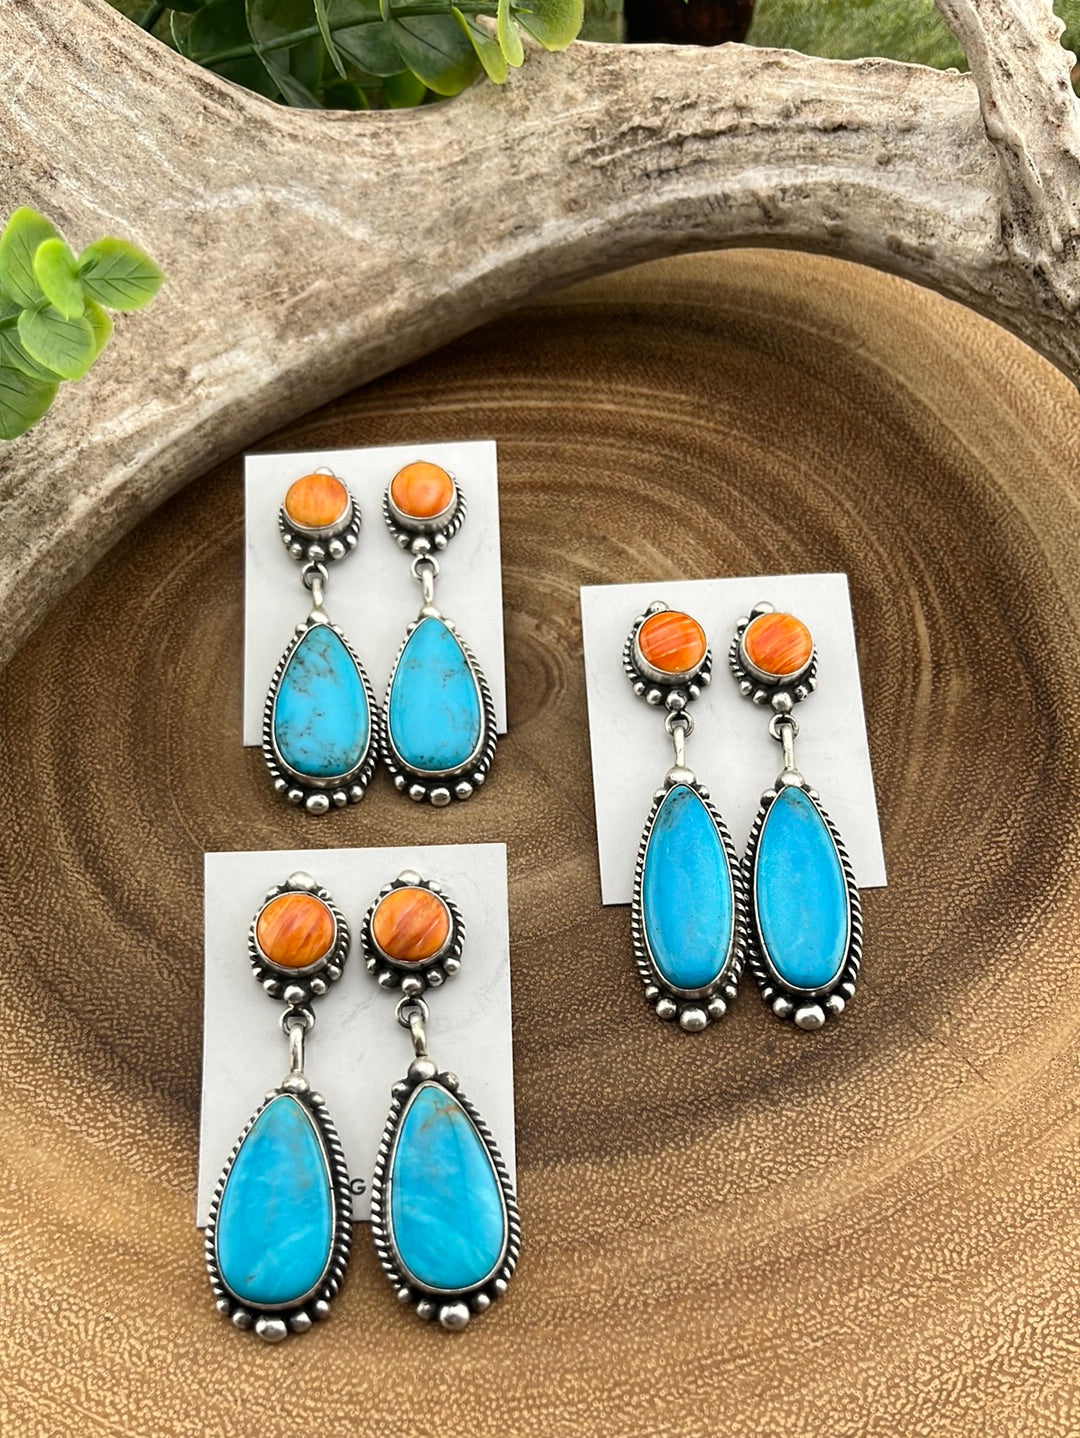 Fairview Orange Spiny Post Turquoise Drop Earrings - 2.5"